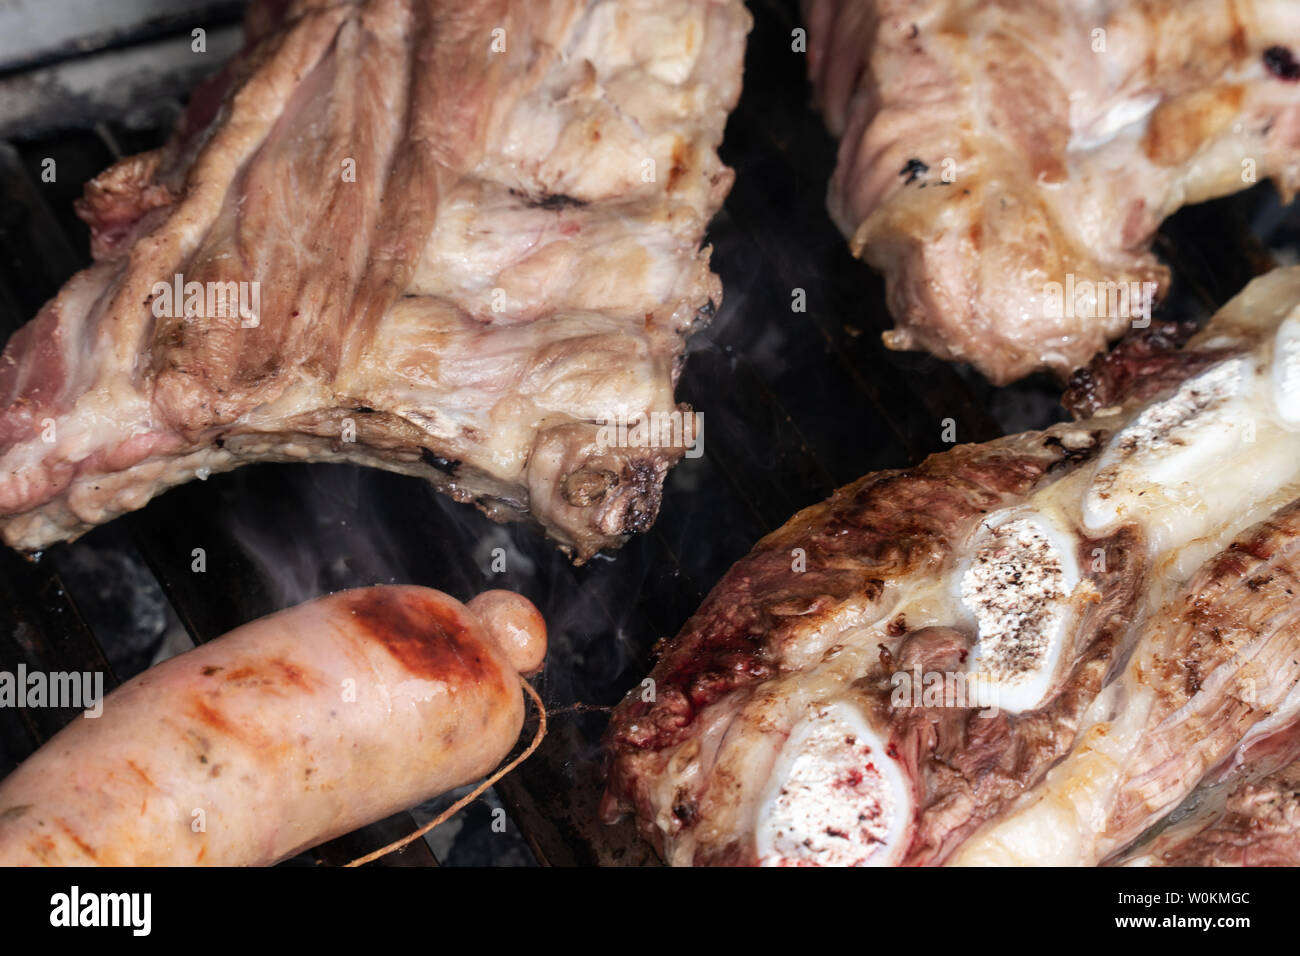 Barbecue grill with grilled pork ribs, beef and criollo sausage. Spanish churrasco Stock Photo